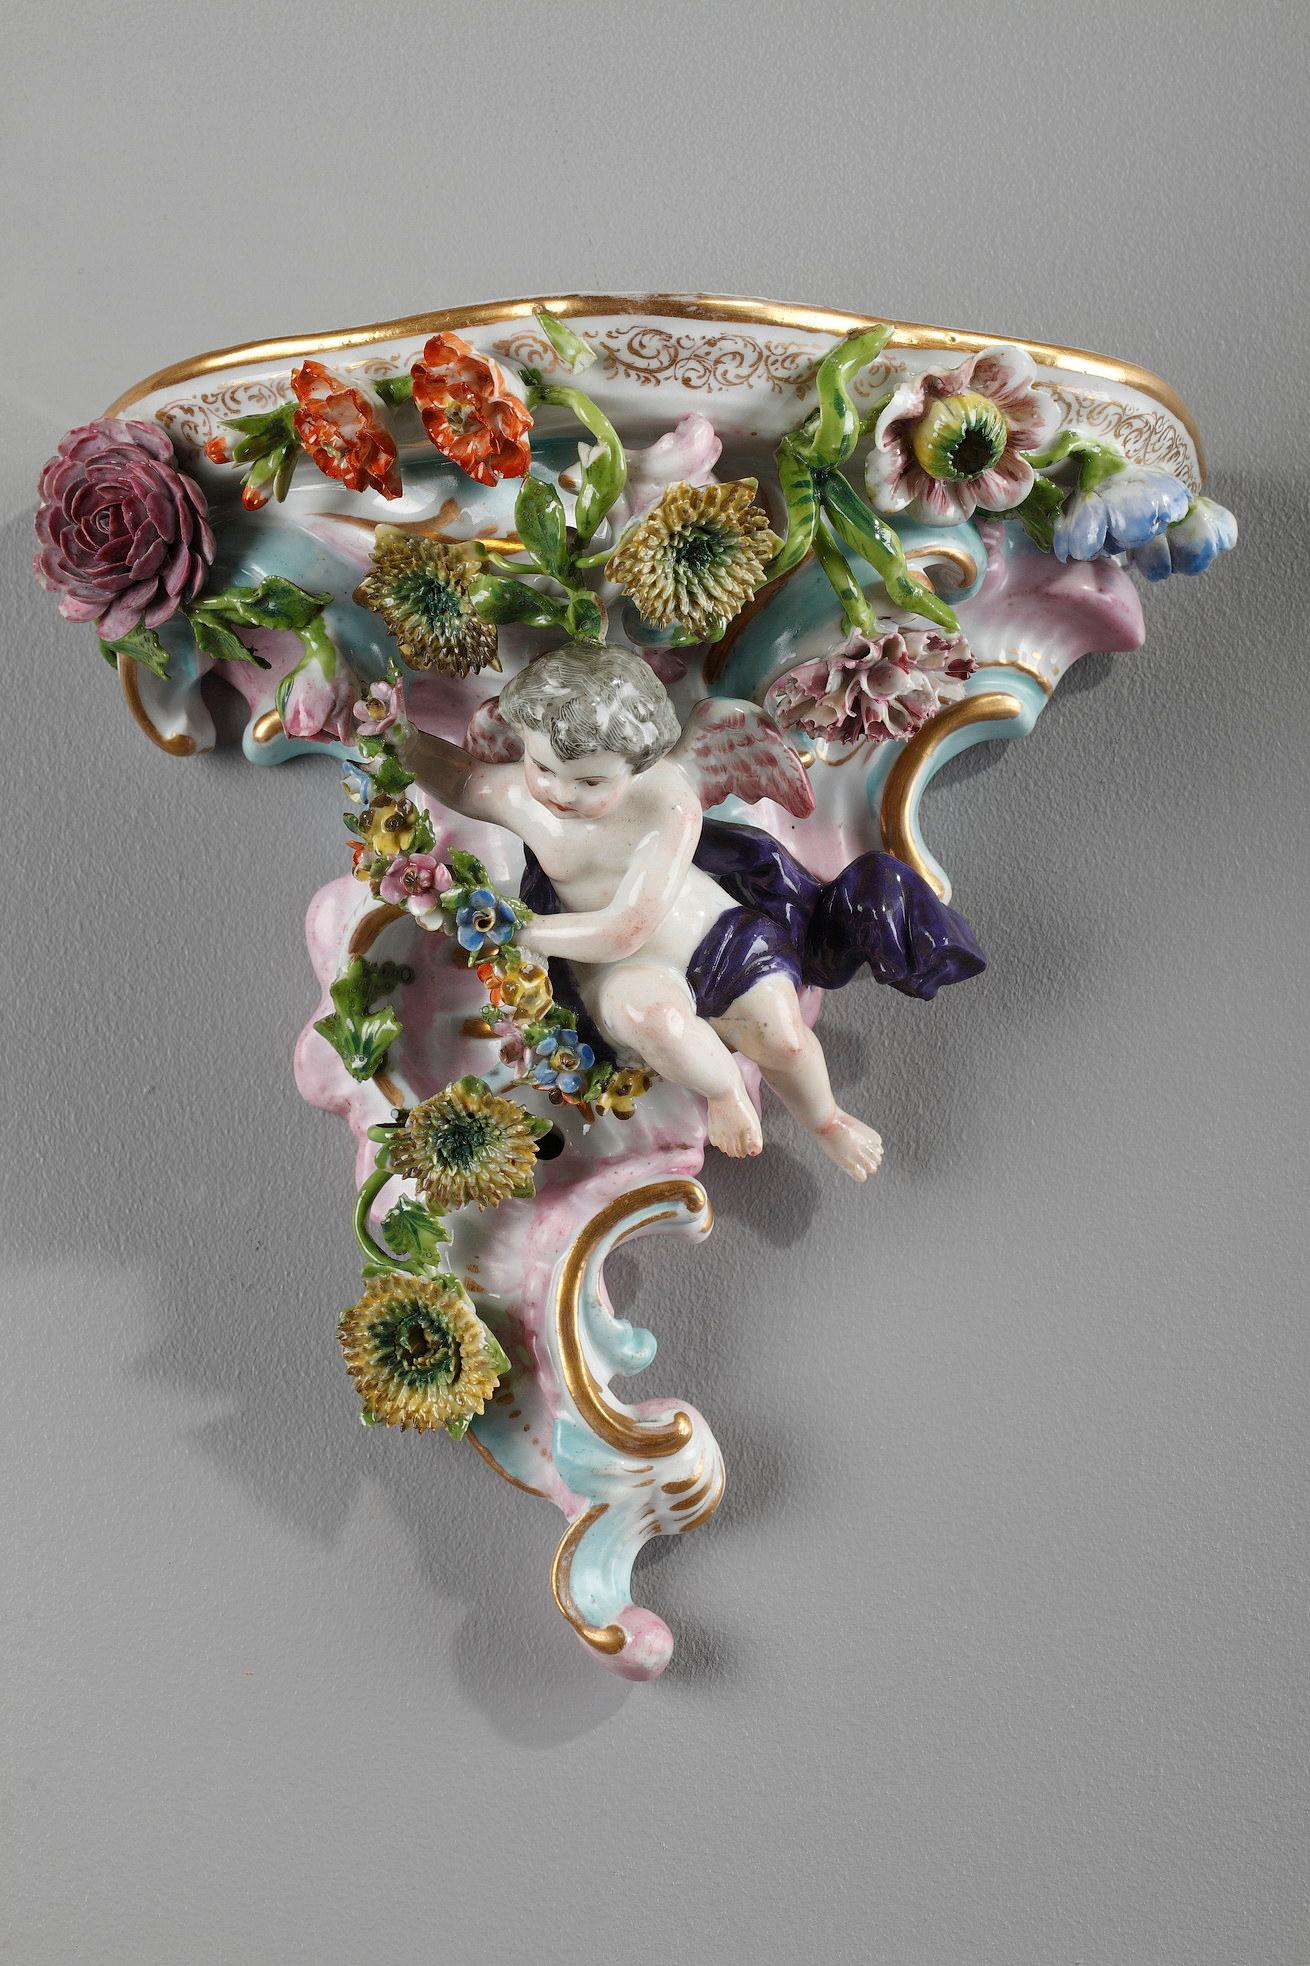 Two rocaille brackets in enamelled porcelain in the style of Meissen manufacture. They are decorated with winged putti draped in purple and individualized flowers. This very fine work makes it possible to differentiate the various species of